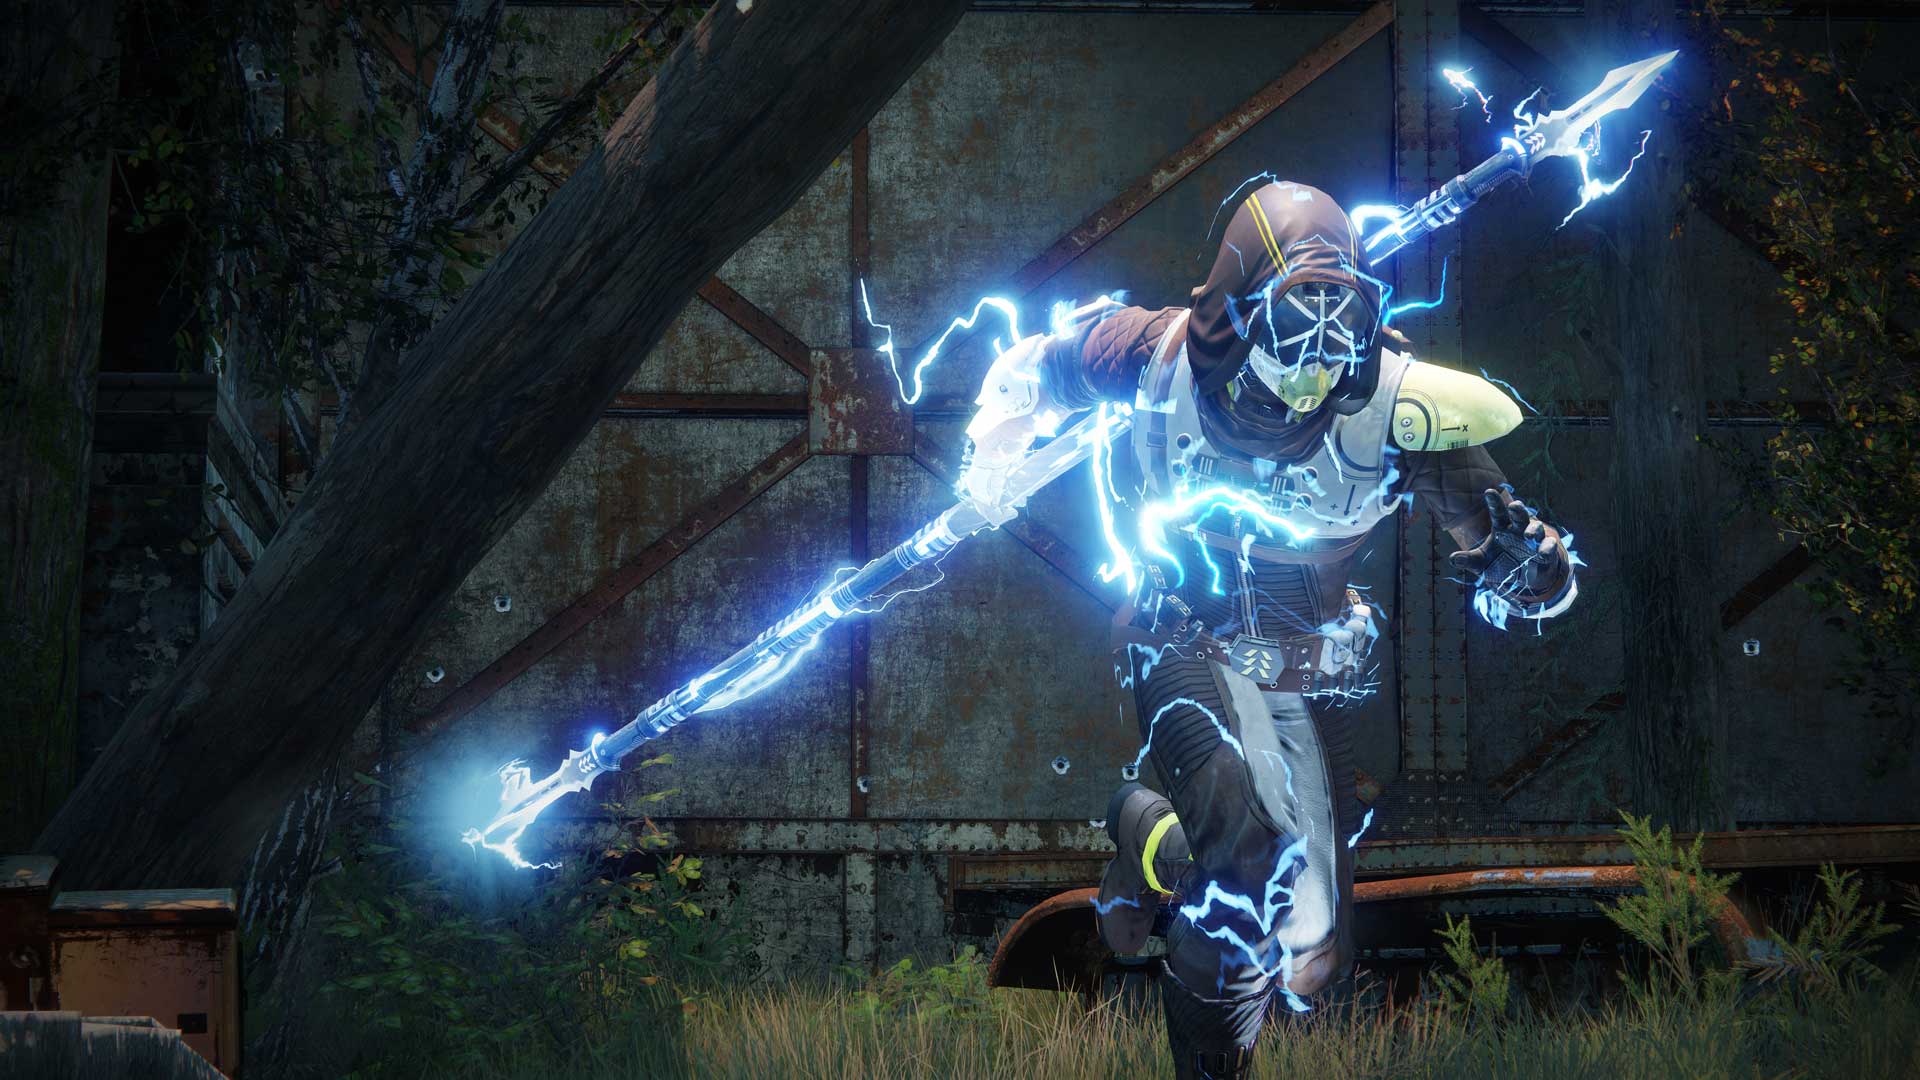 One batch of Destiny 2 PS4 exclusive screens show of Shadows strike | VG247